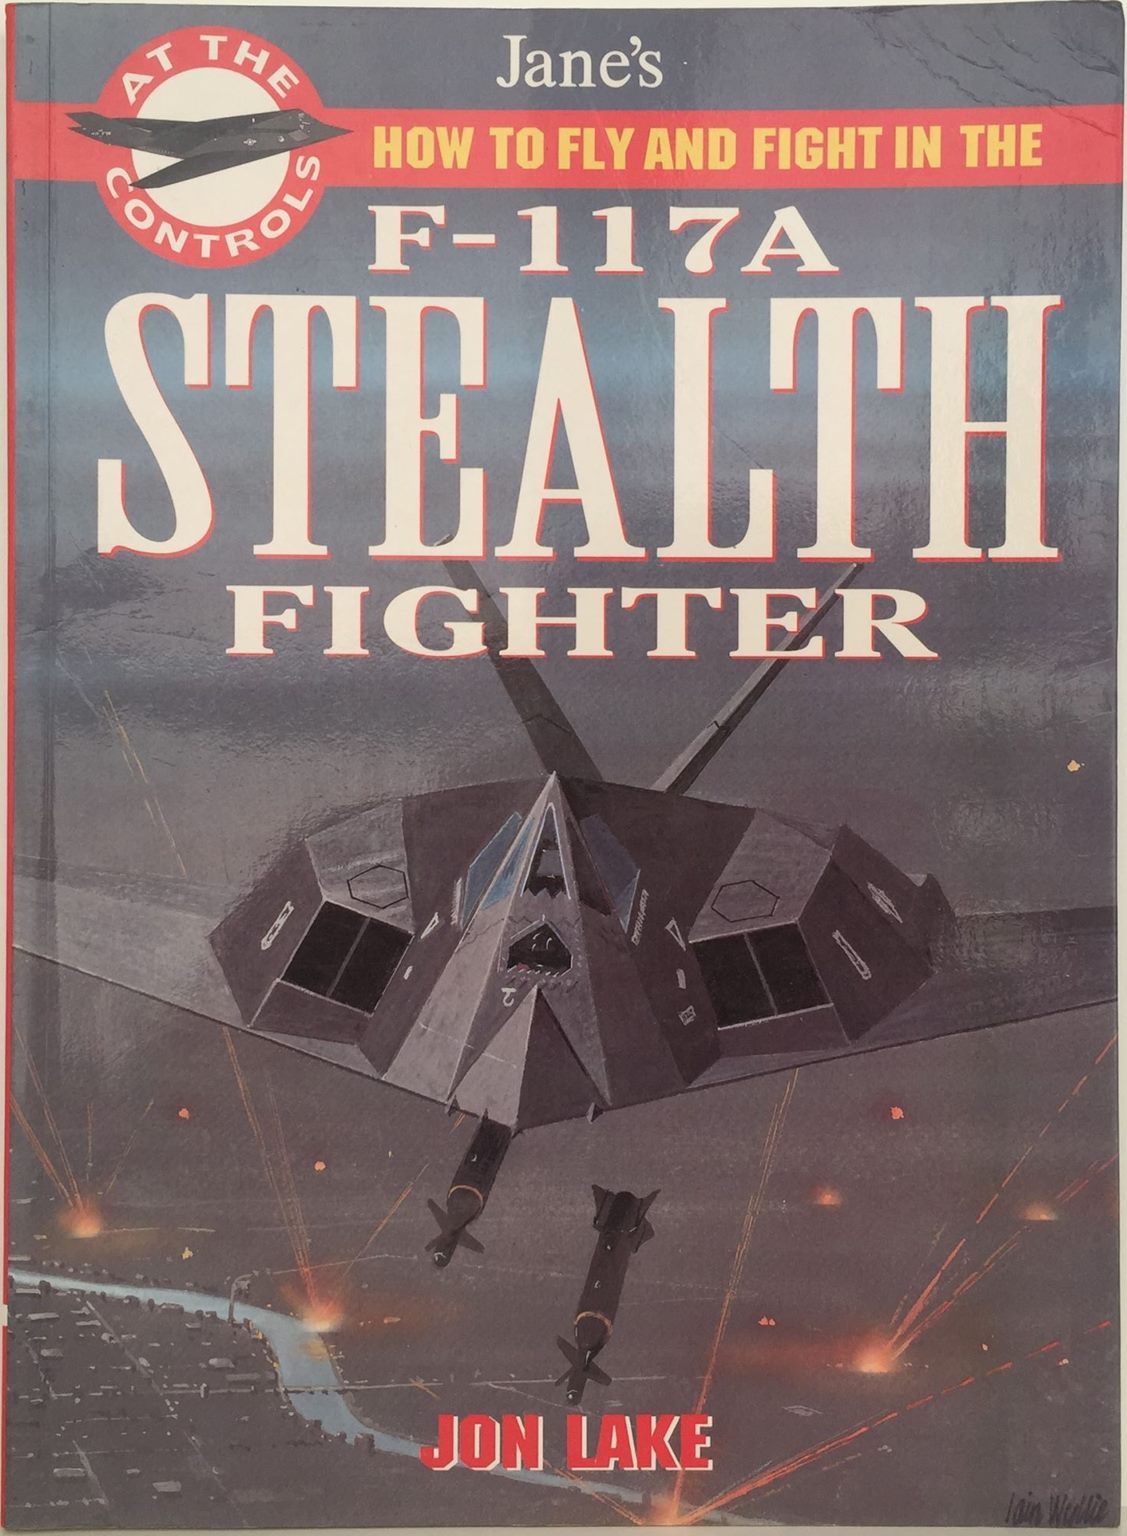 F-117 STEALTH FIGHTER: At The Controls